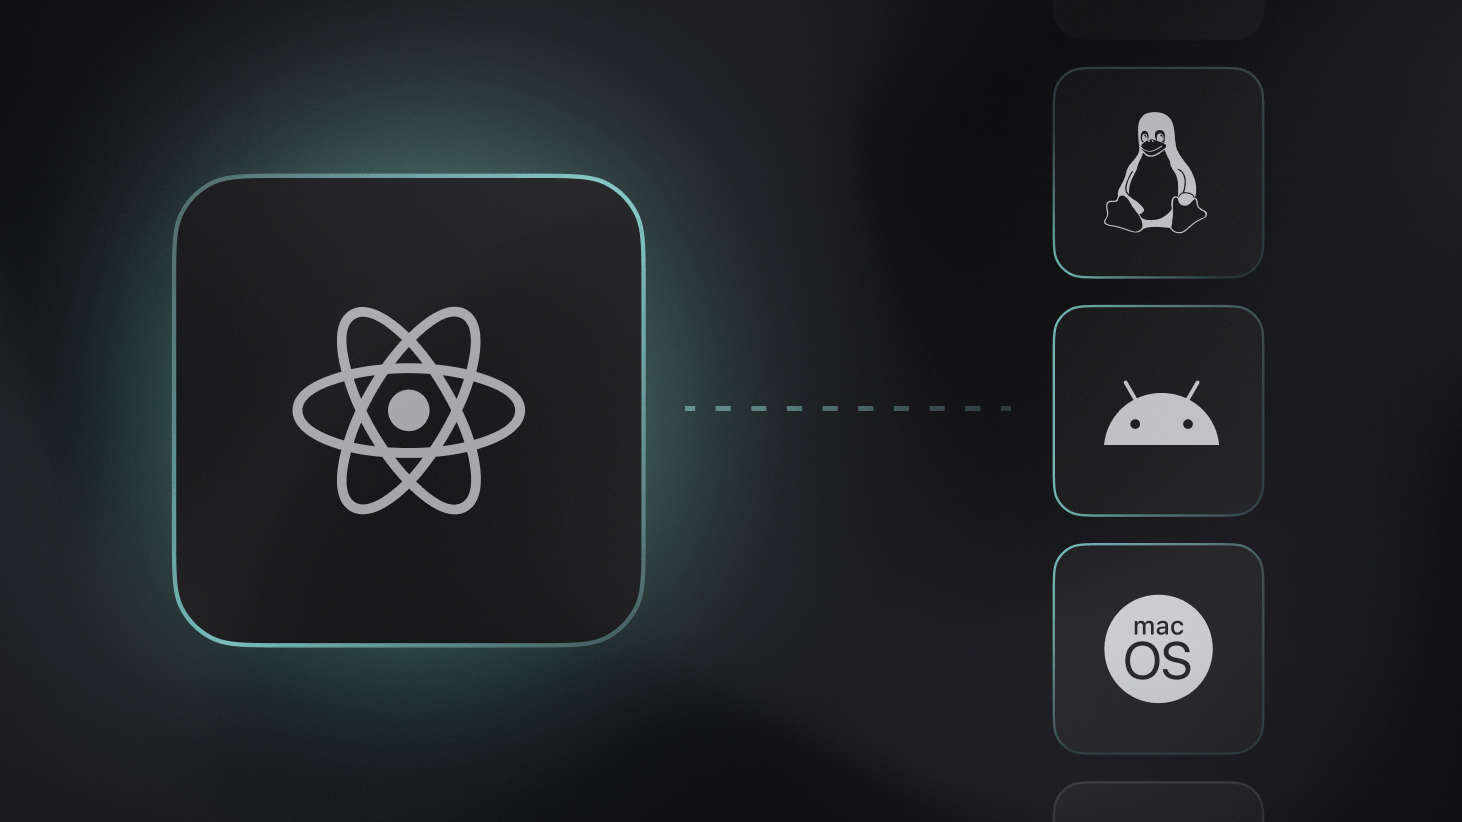 Building cross platform applications with React Native